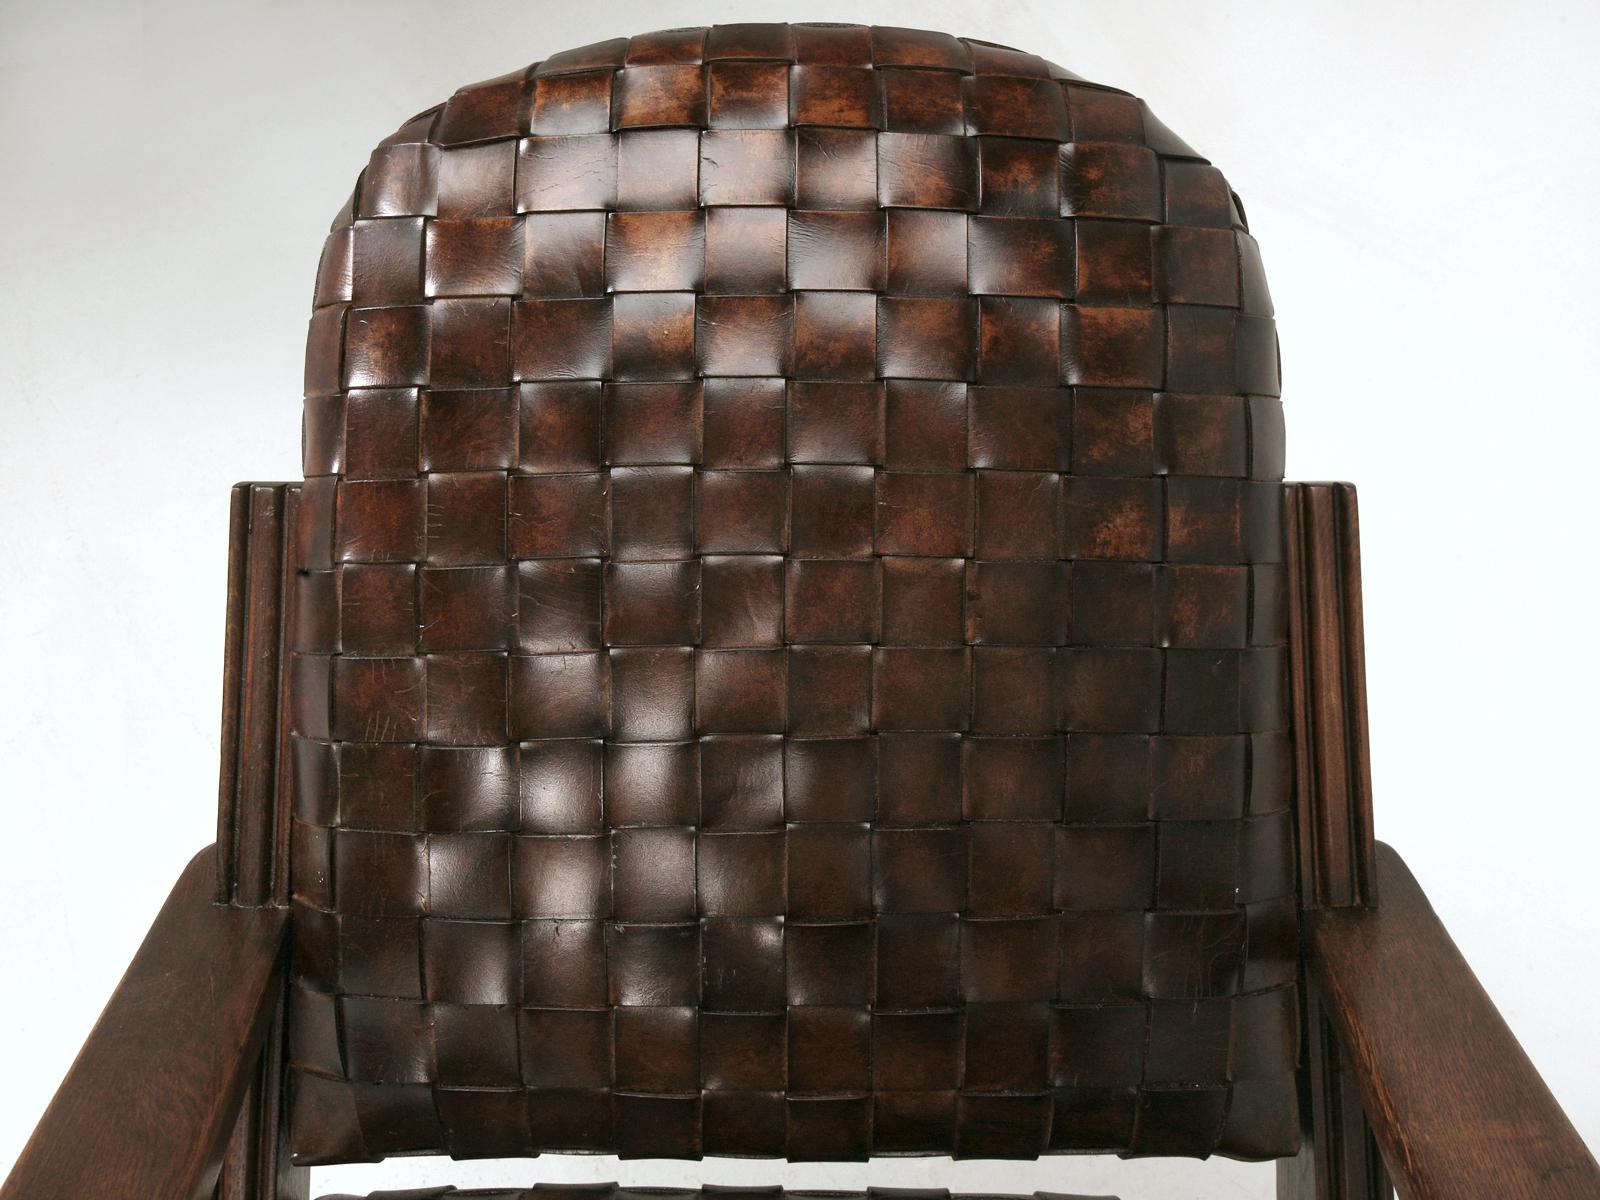 Early Art Deco or late Arts & Craft woven leather club chairs are constructed from thick leather straps are vegetable tanned and hand colored with a combination of waxes, proteins and mineral dyes to fully penetrate the leather. A second application